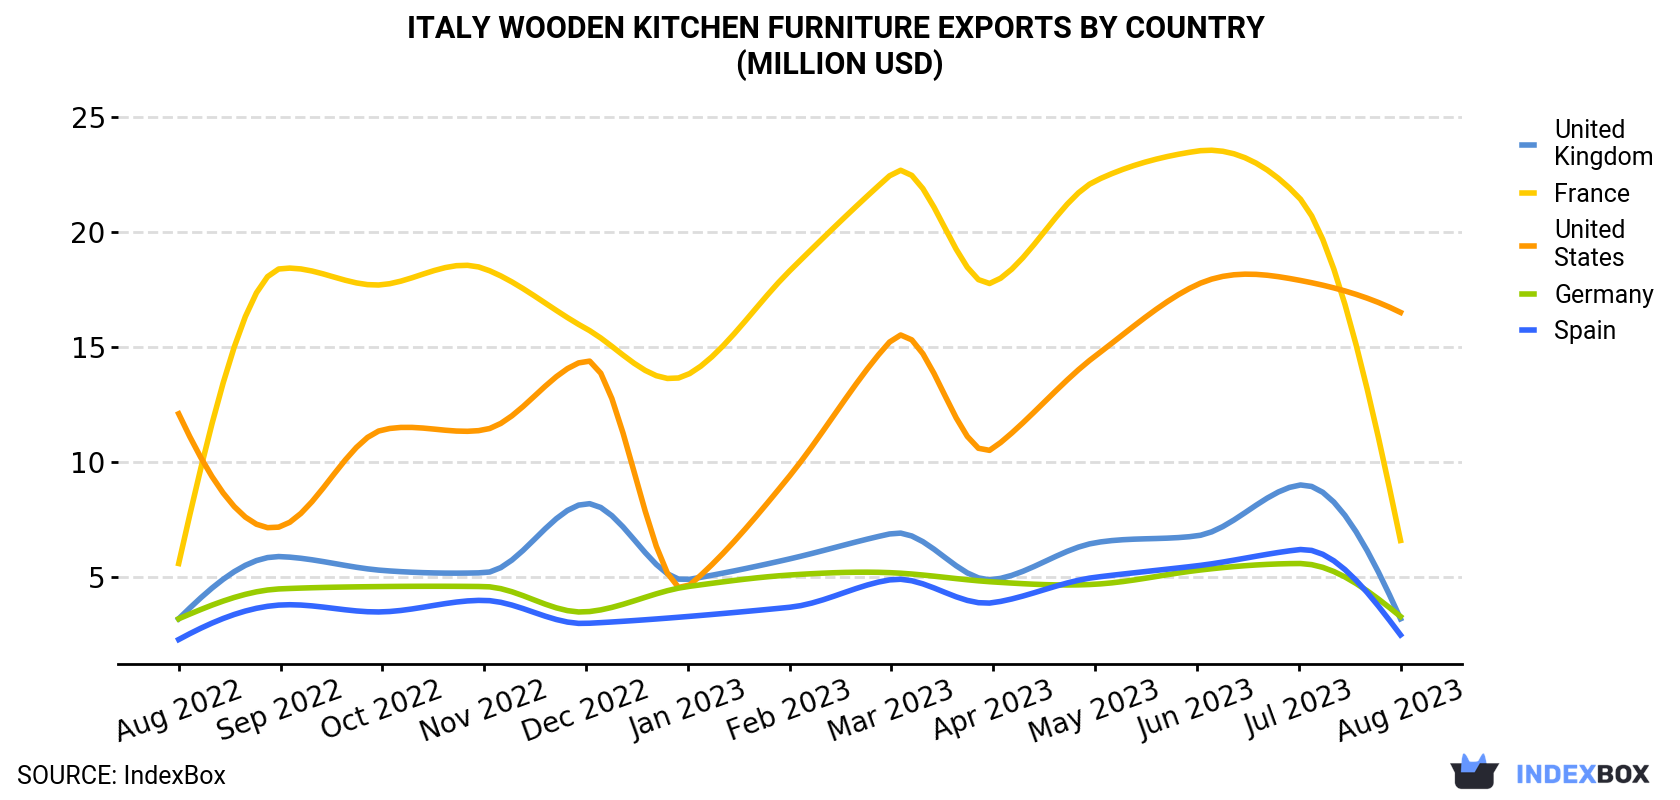 Italy Wooden Kitchen Furniture Exports By Country (Million USD)